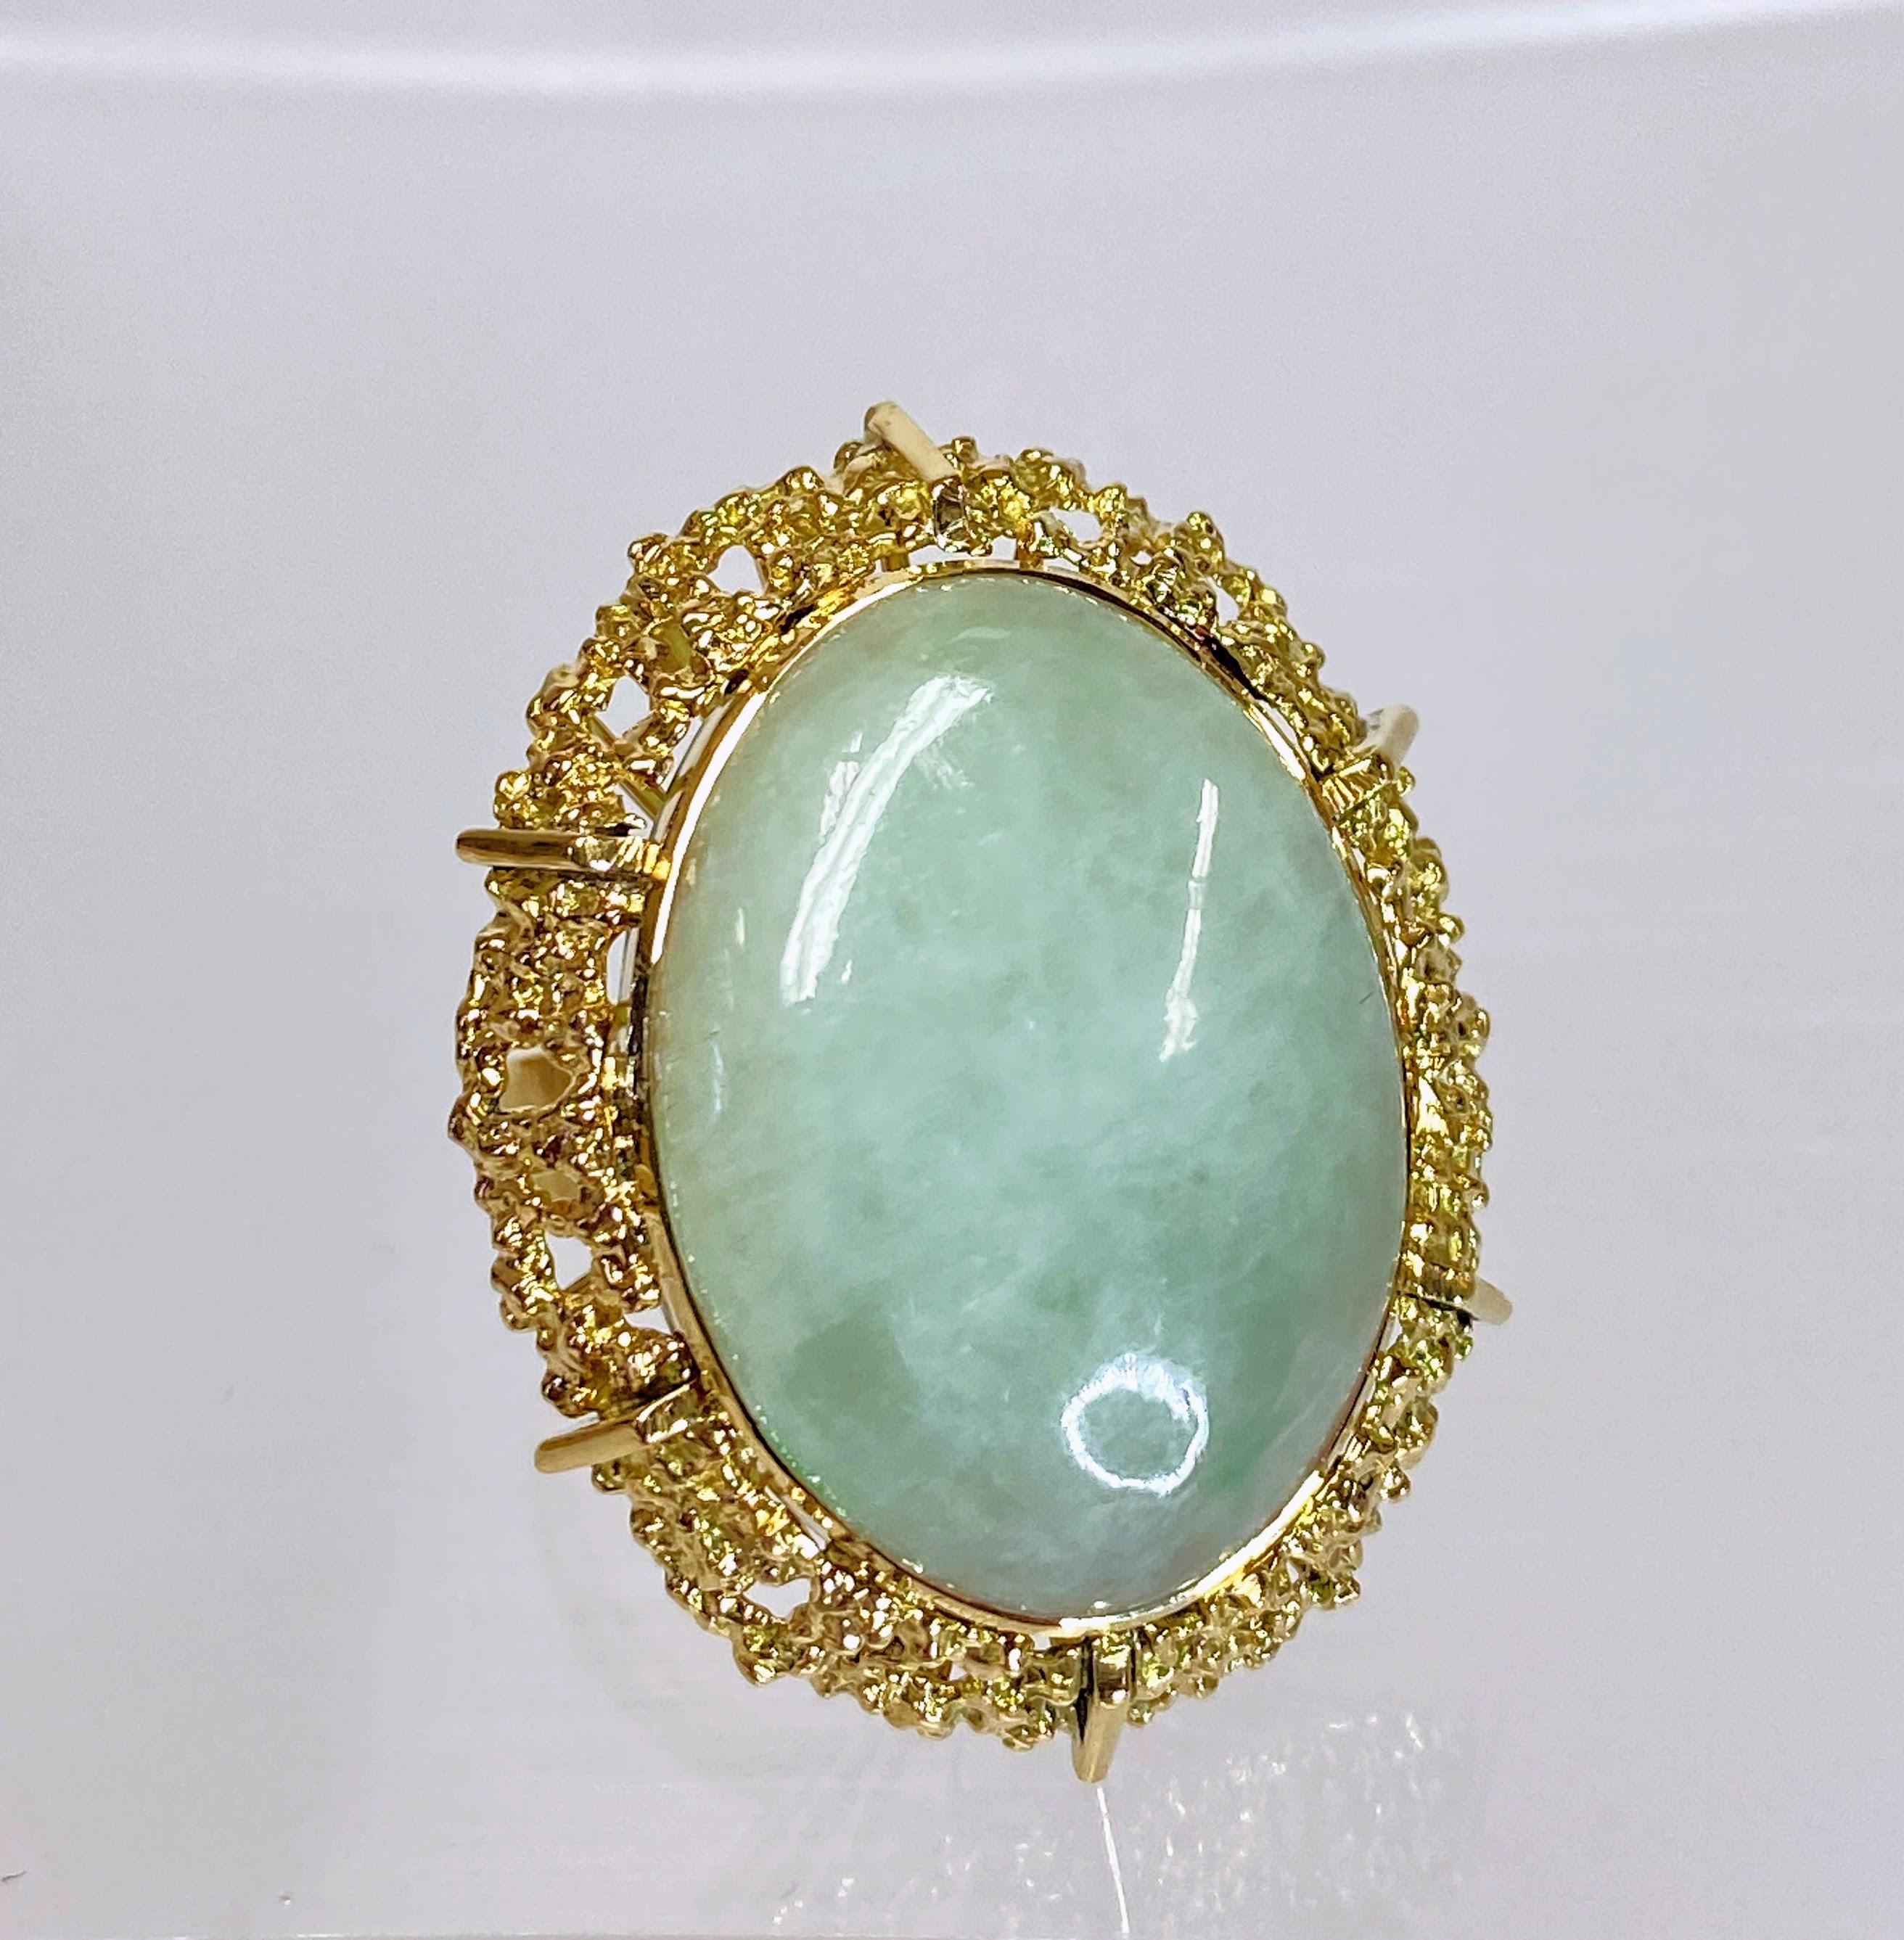 This vintage 18K yellow gold Mid-Century 1960s oval cut grand jade ring is a remarkable blend of timeless elegance and retro charm. Crafted with meticulous craftsmanship, this ring features an exquisite oval-cut jade gemstone set within a luxurious